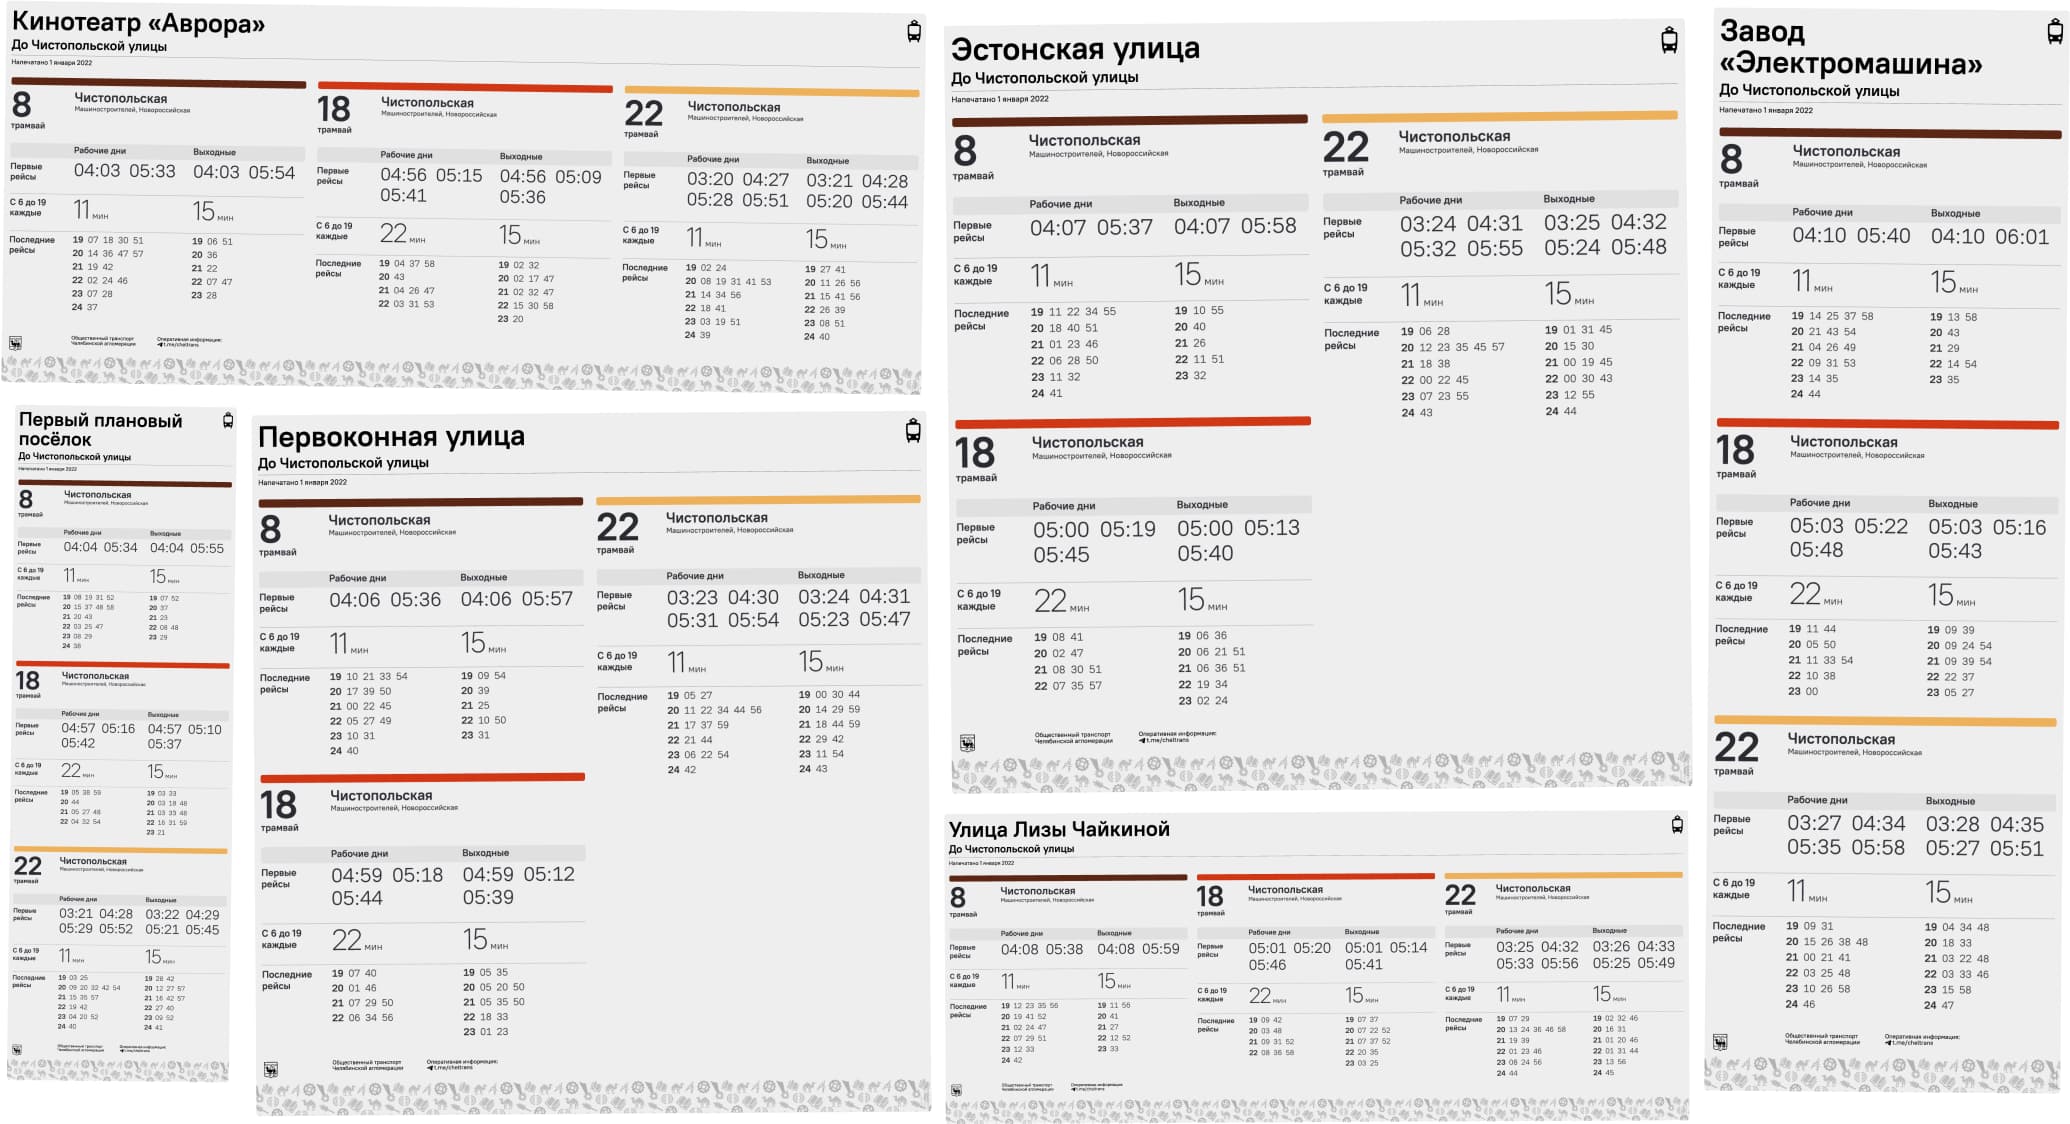 Design and generator for transit timetables